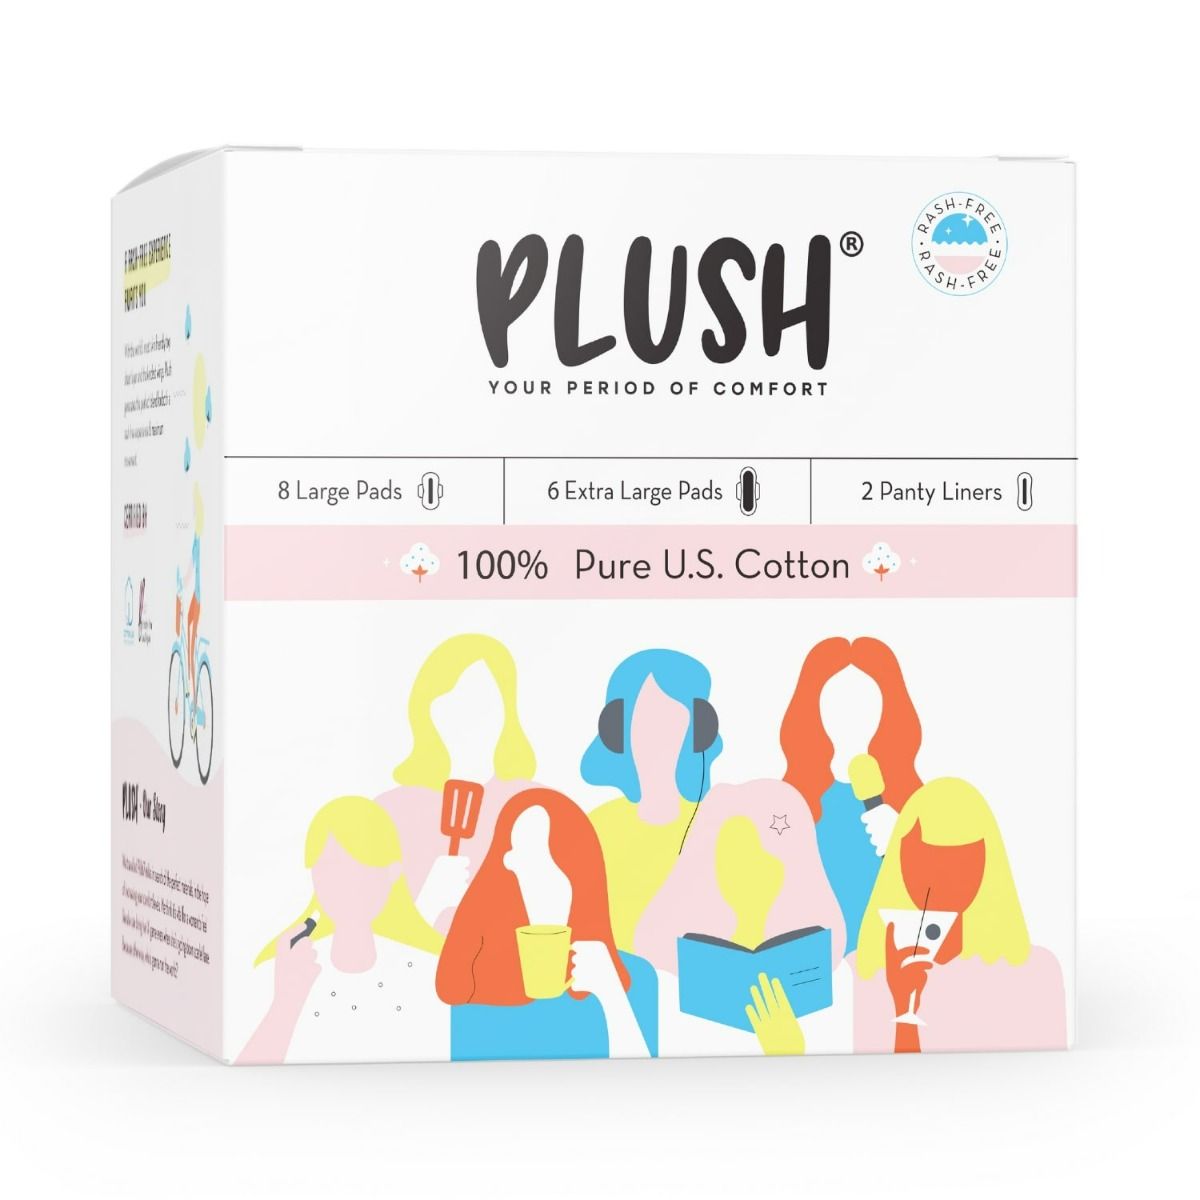 Buy Plush 100% Pure U.S Cotton Sanitary Pads, 14 Count Online